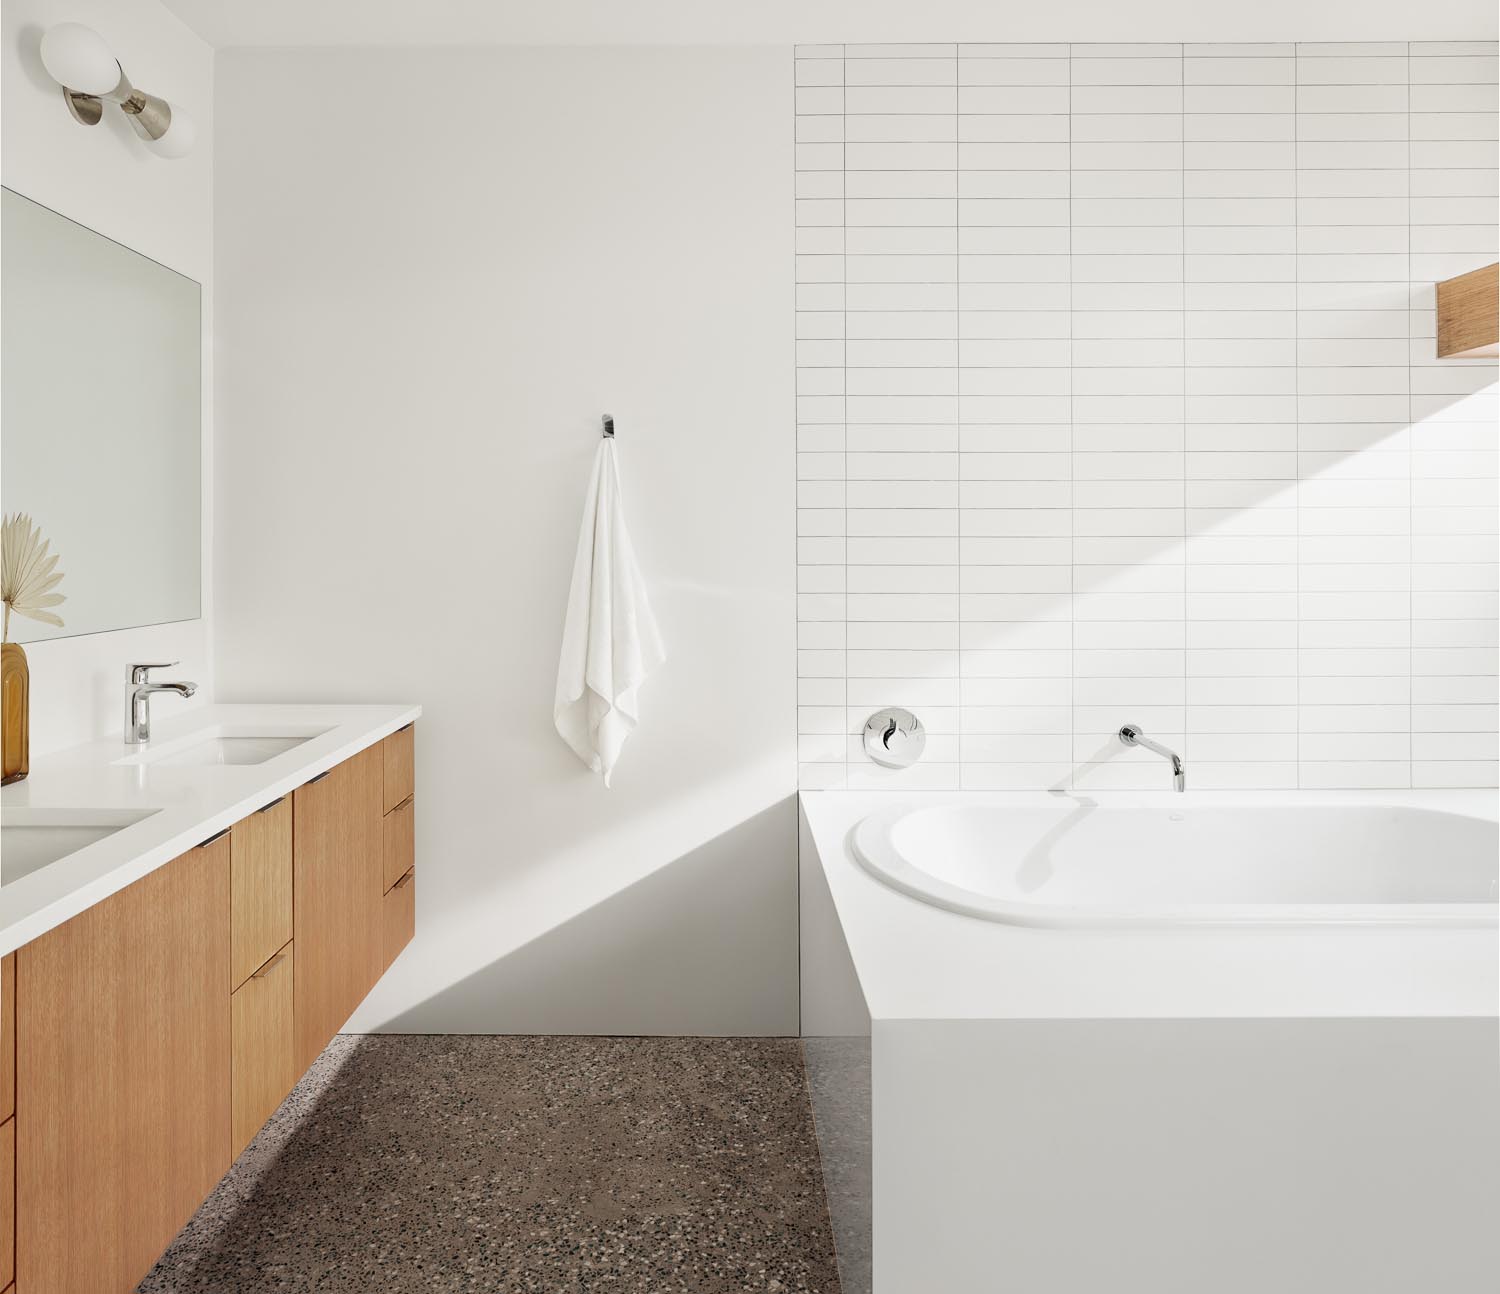 In this modern bathroom, there's a floating wood vanity, a built-in bathtub, and walls lined with white rectangular tiles.